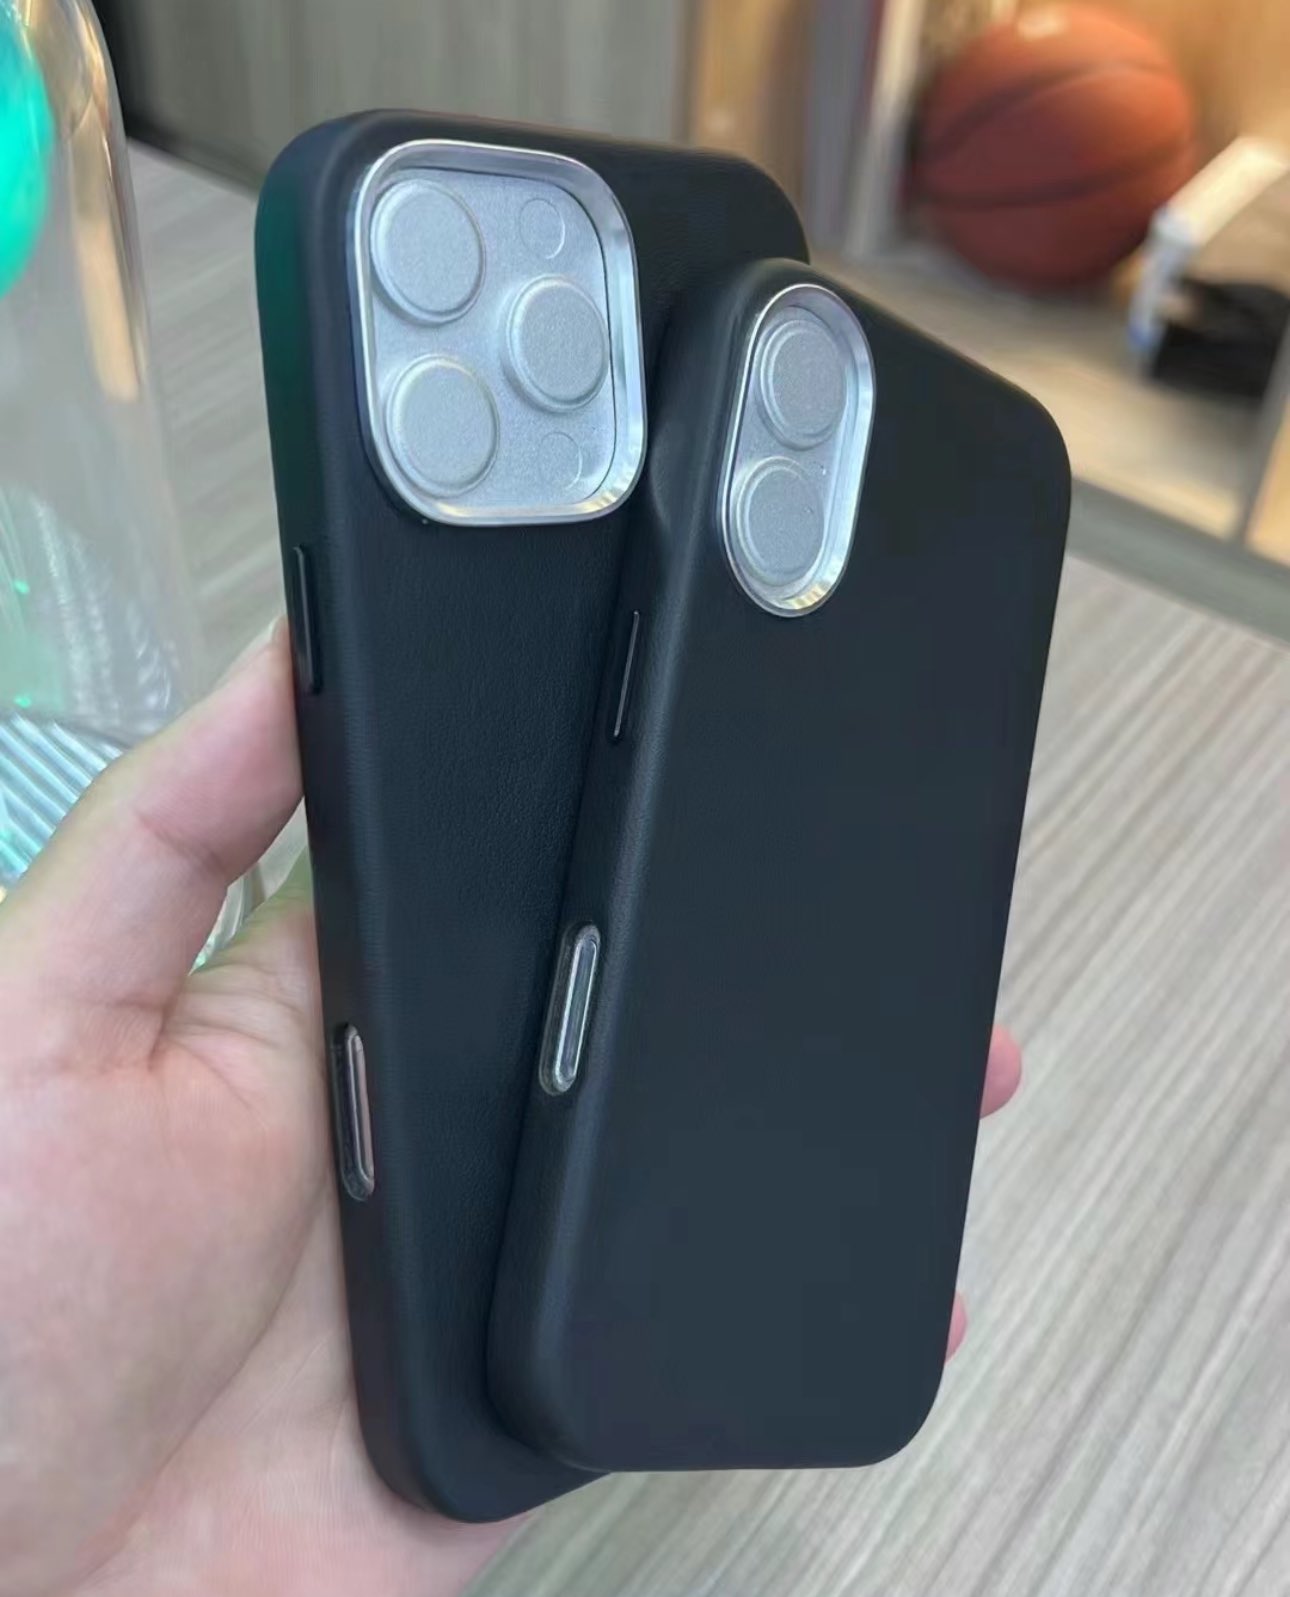 Alleged dummy models of the iPhone 16 and iPhone 16 Pro Max, within identical cases